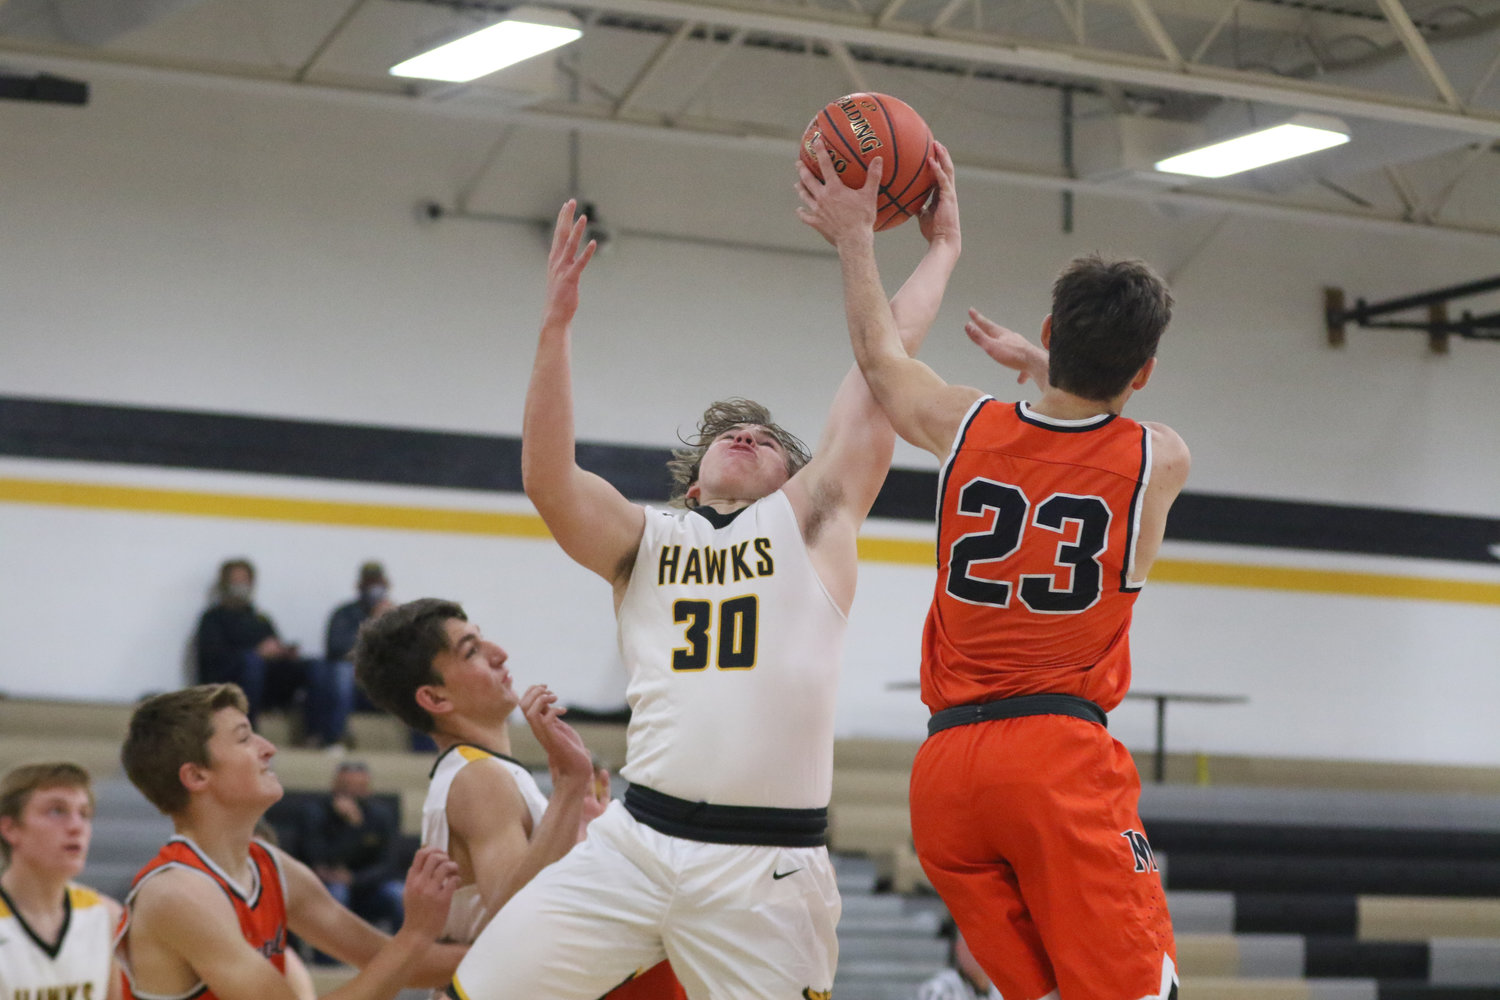 Mid-Prairie's Justice Jones fights for a rebound during the first quarter of a scrimmage with Mediapolis in Wellman on Saturday, November 21.